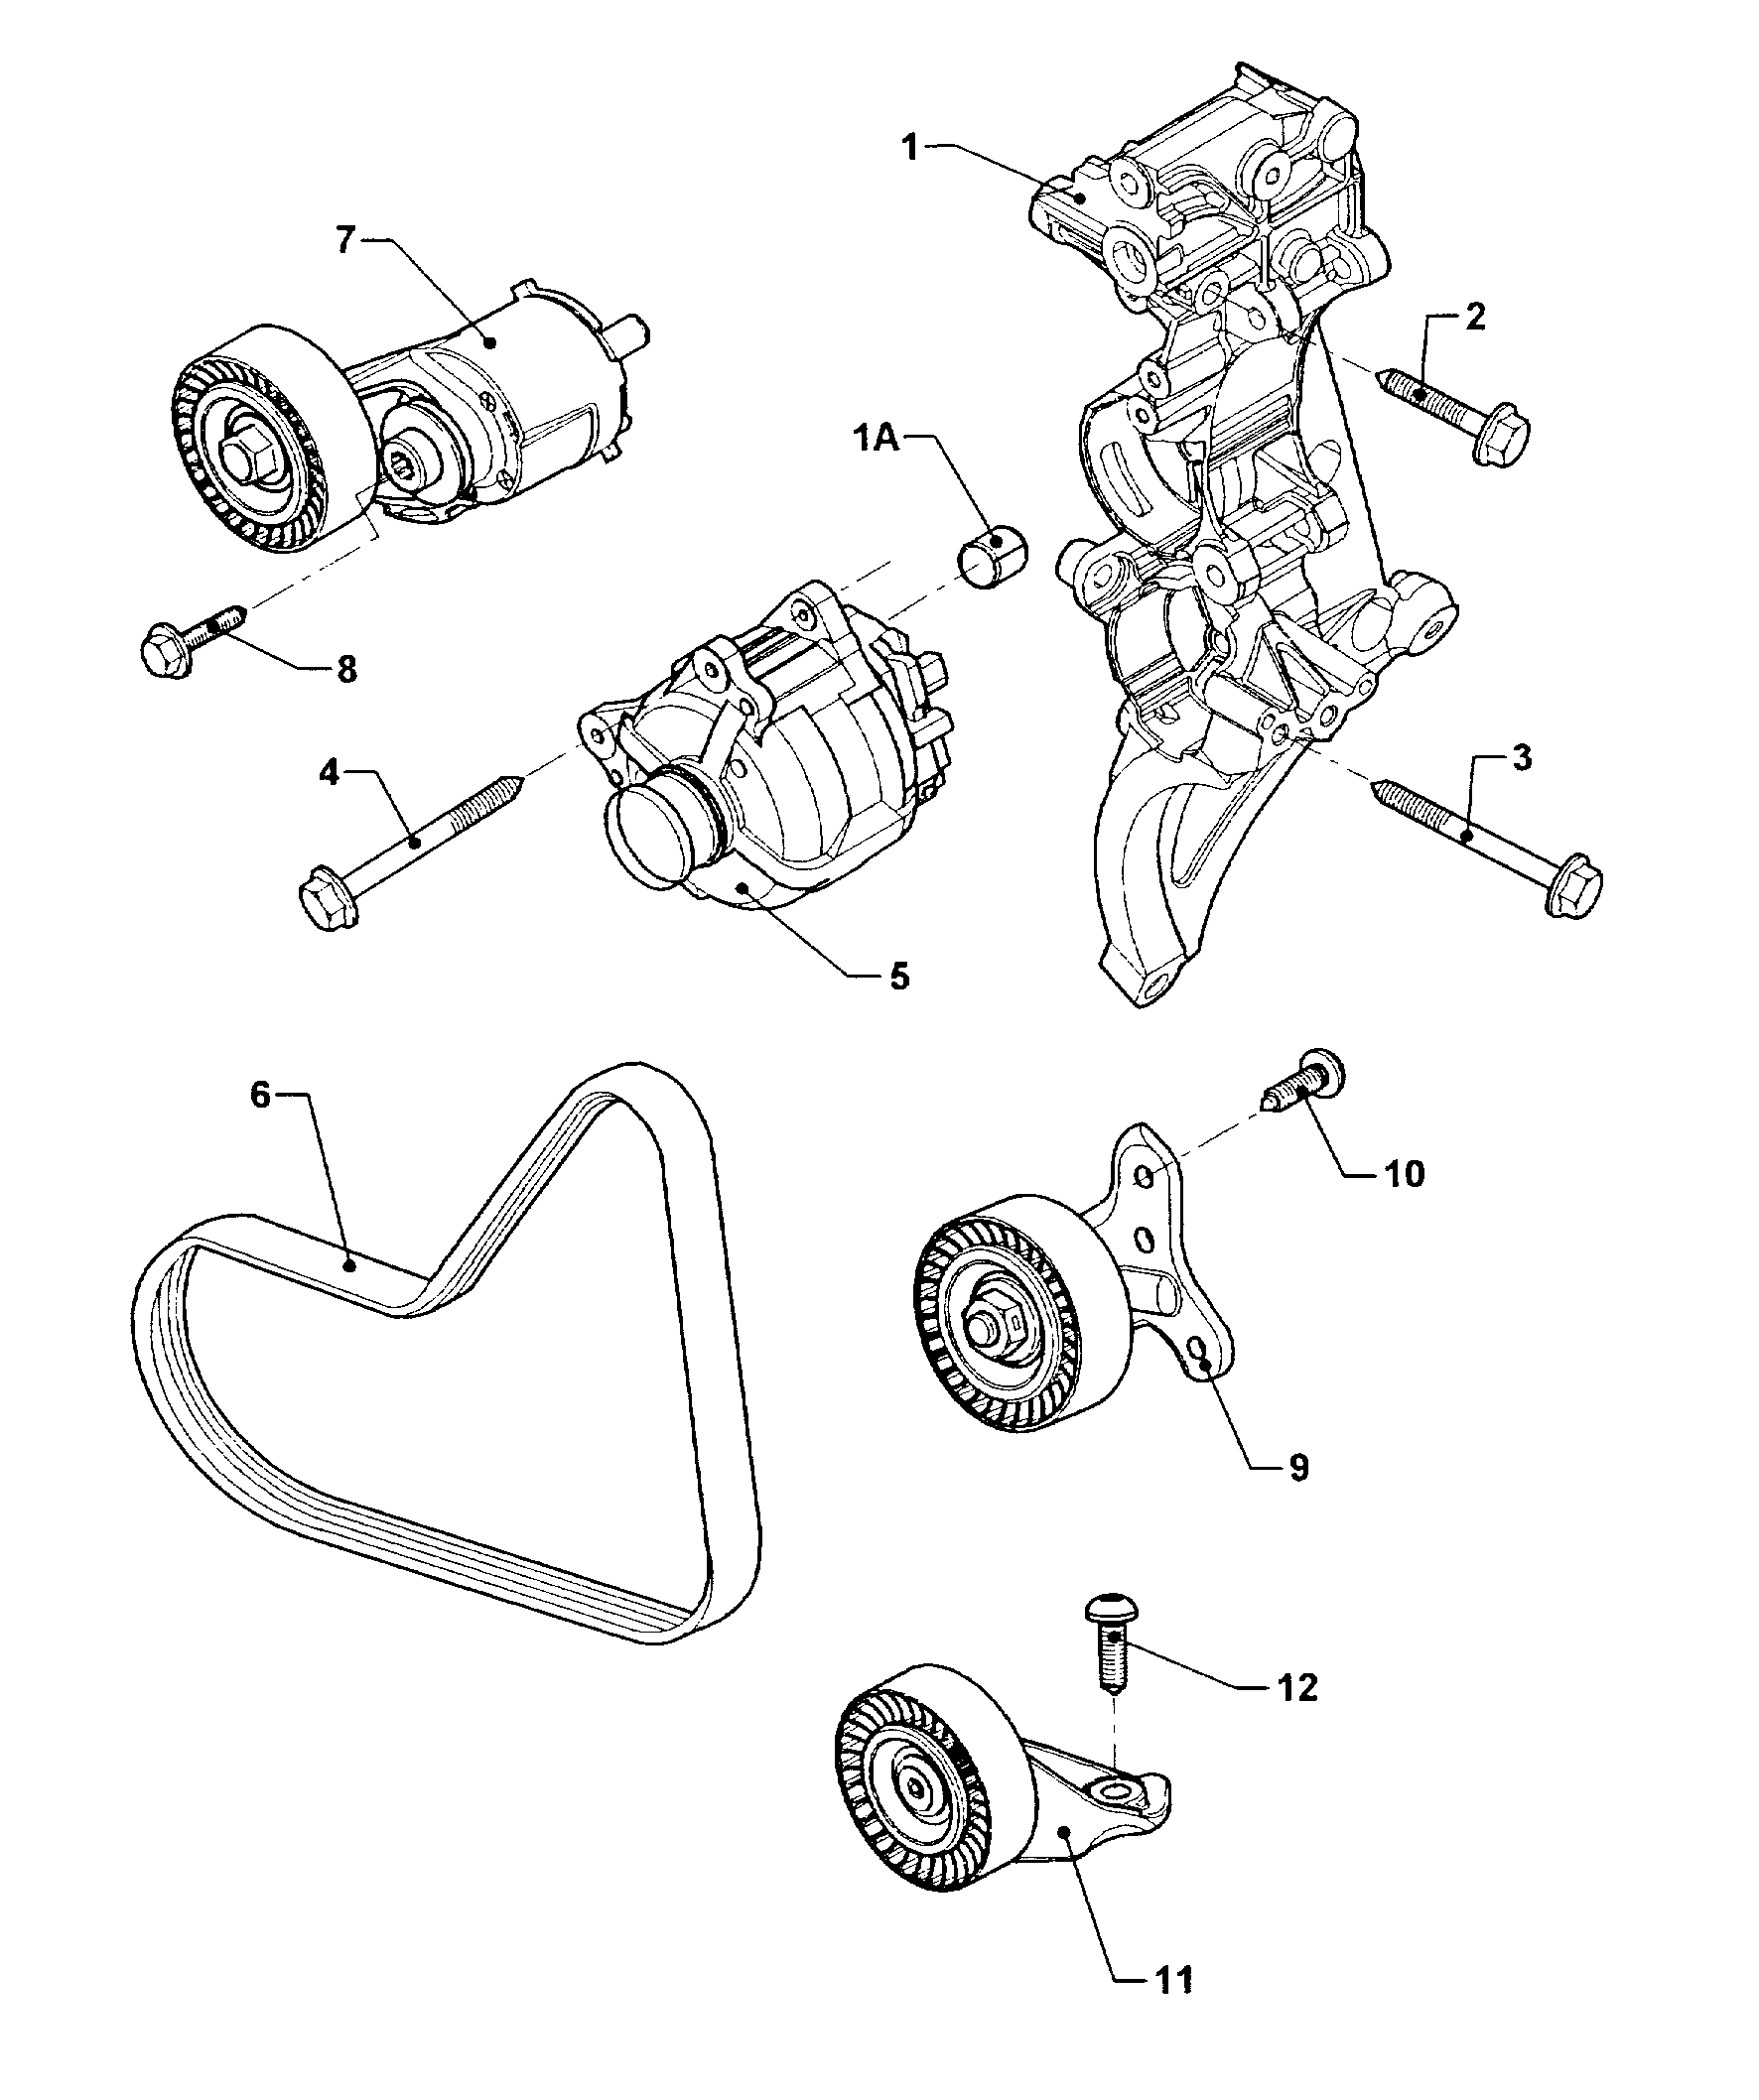 connecting and mounting parts<br>for alternatorPoly-V-belt 2.5Ltr. - Jetta - je